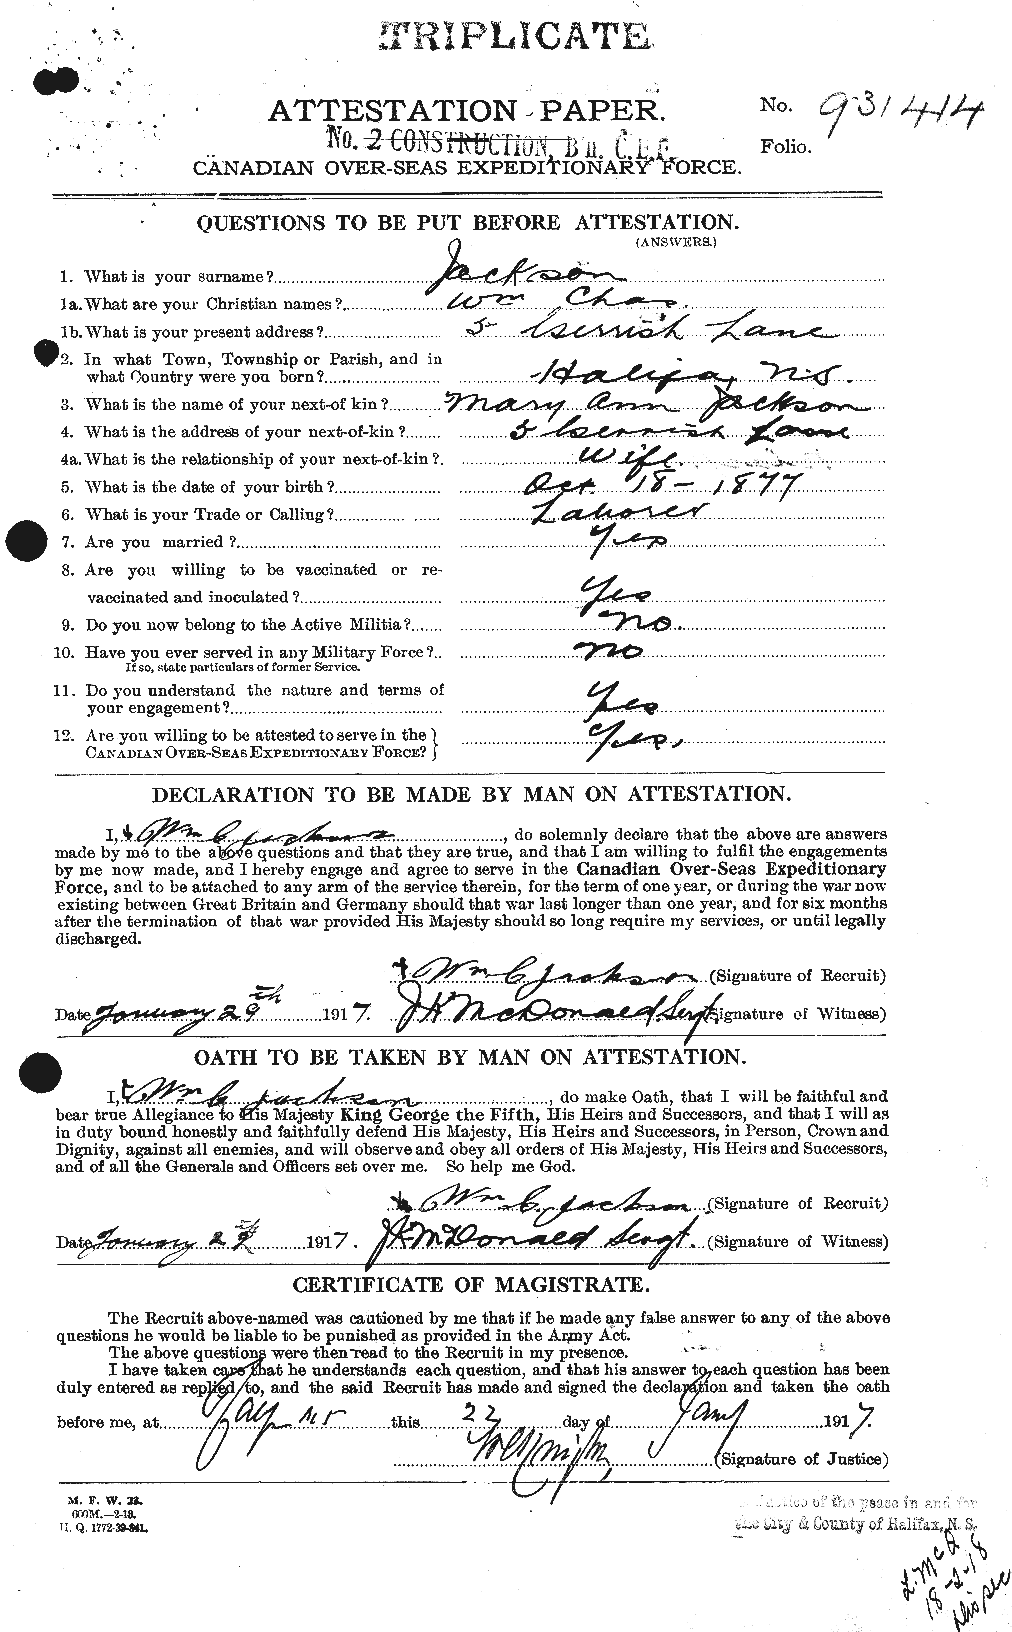 Personnel Records of the First World War - CEF 412991a